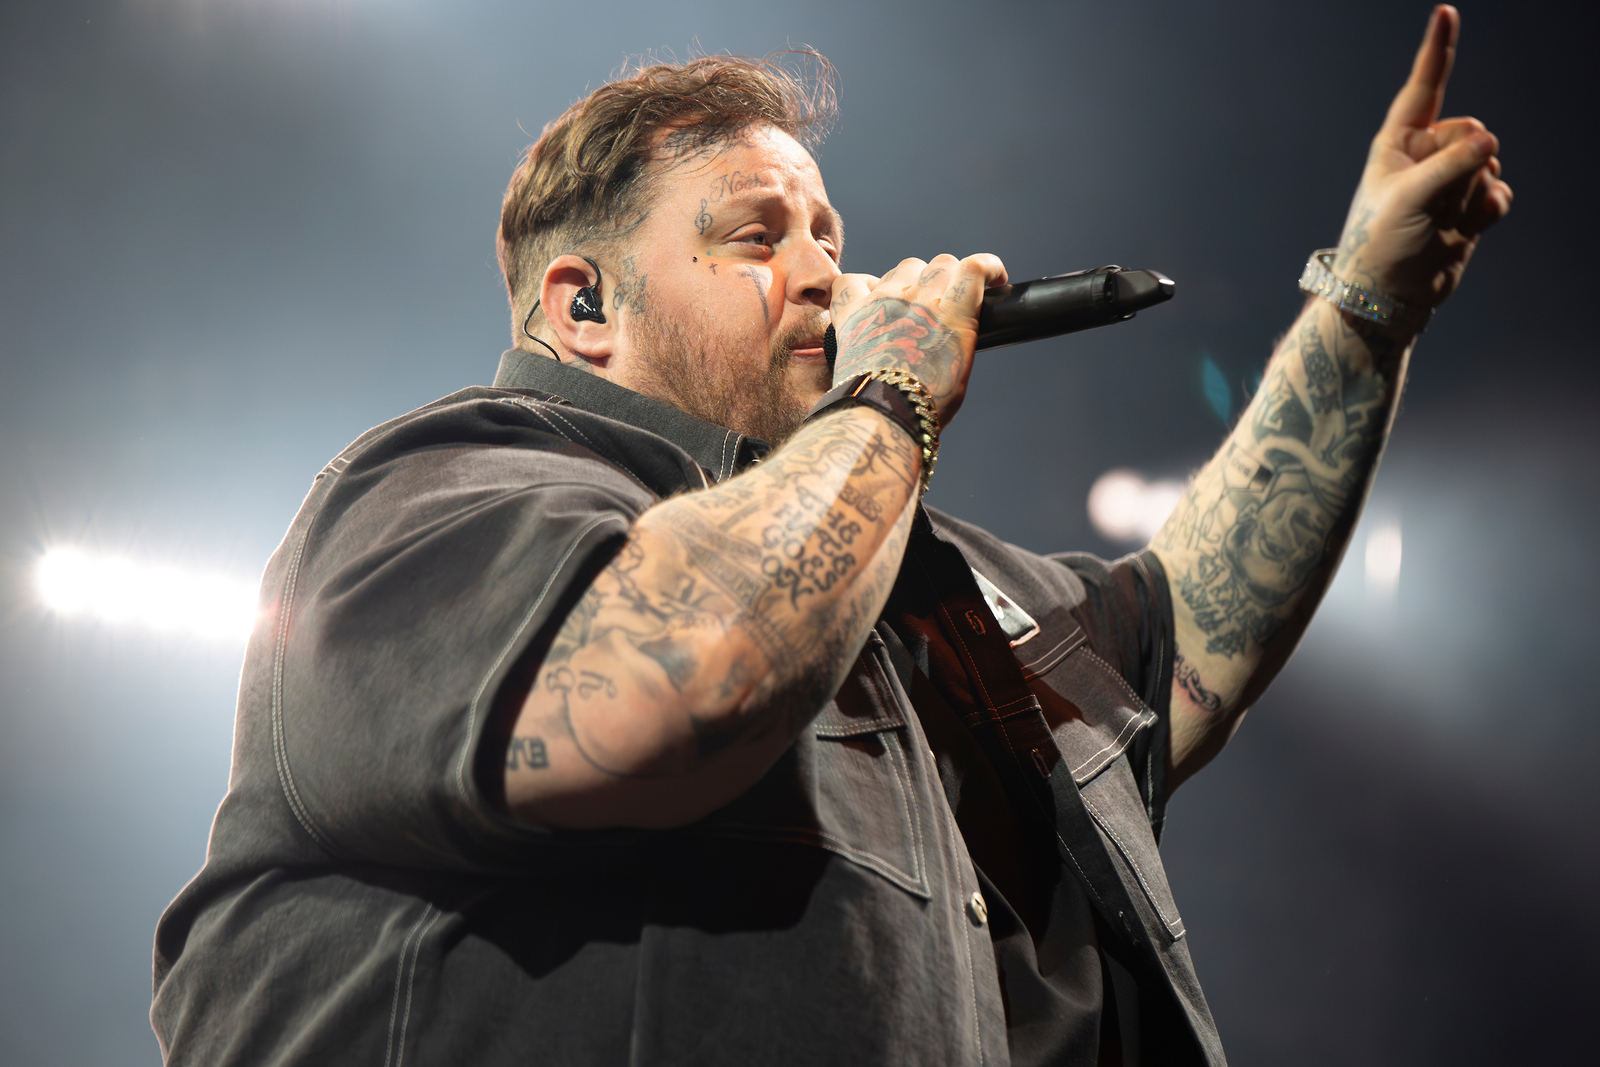 6 reasons why you shouldn't have missed Jelly Roll at the AmFam Amp